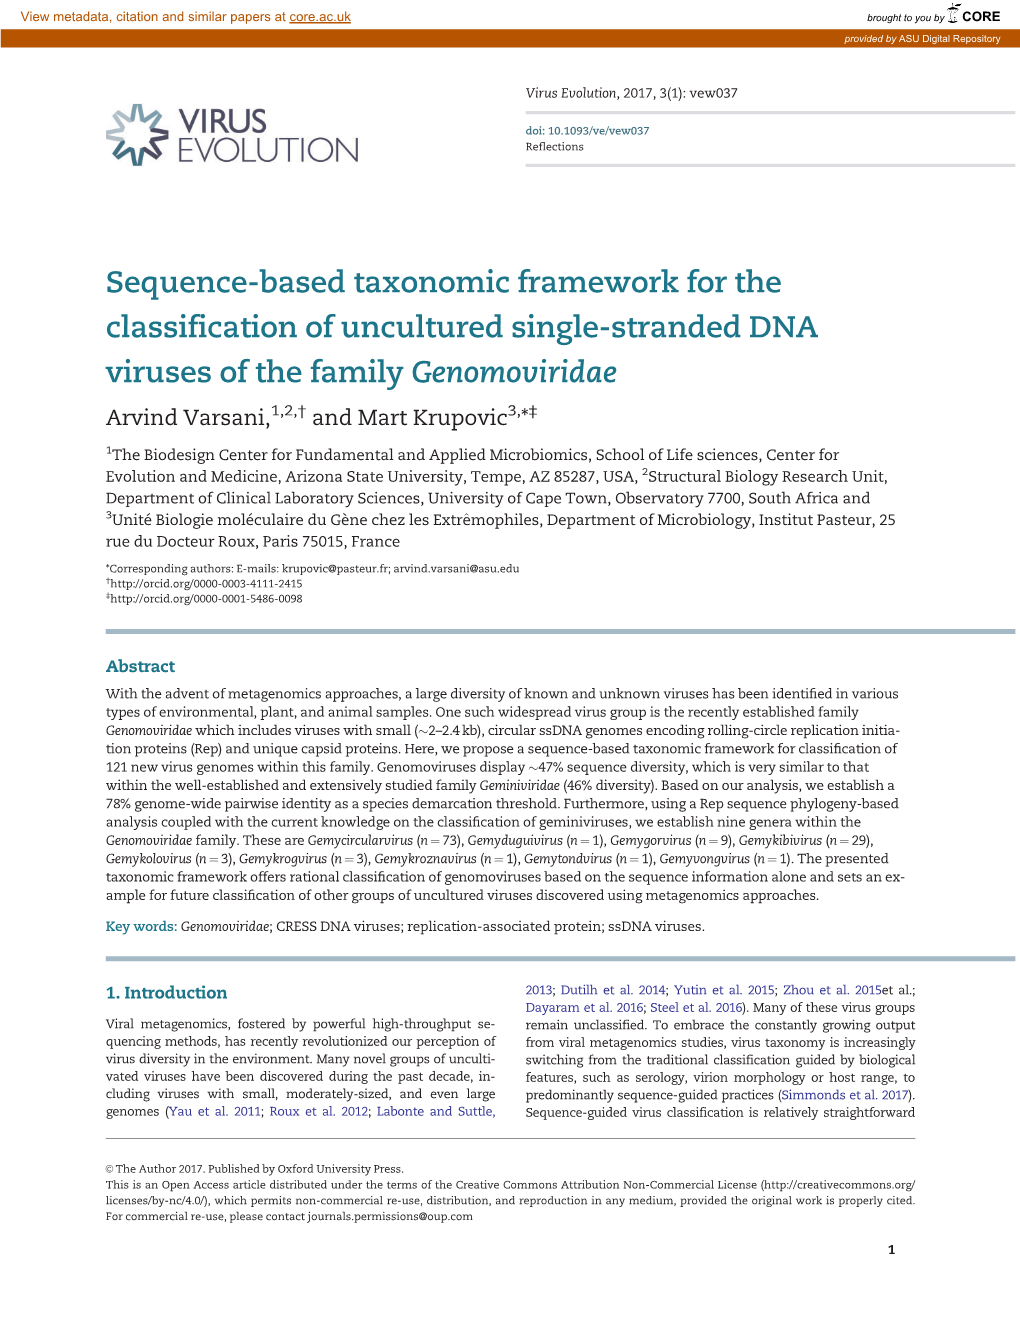 Sequence-Based Taxonomic Framework for the Classification Of